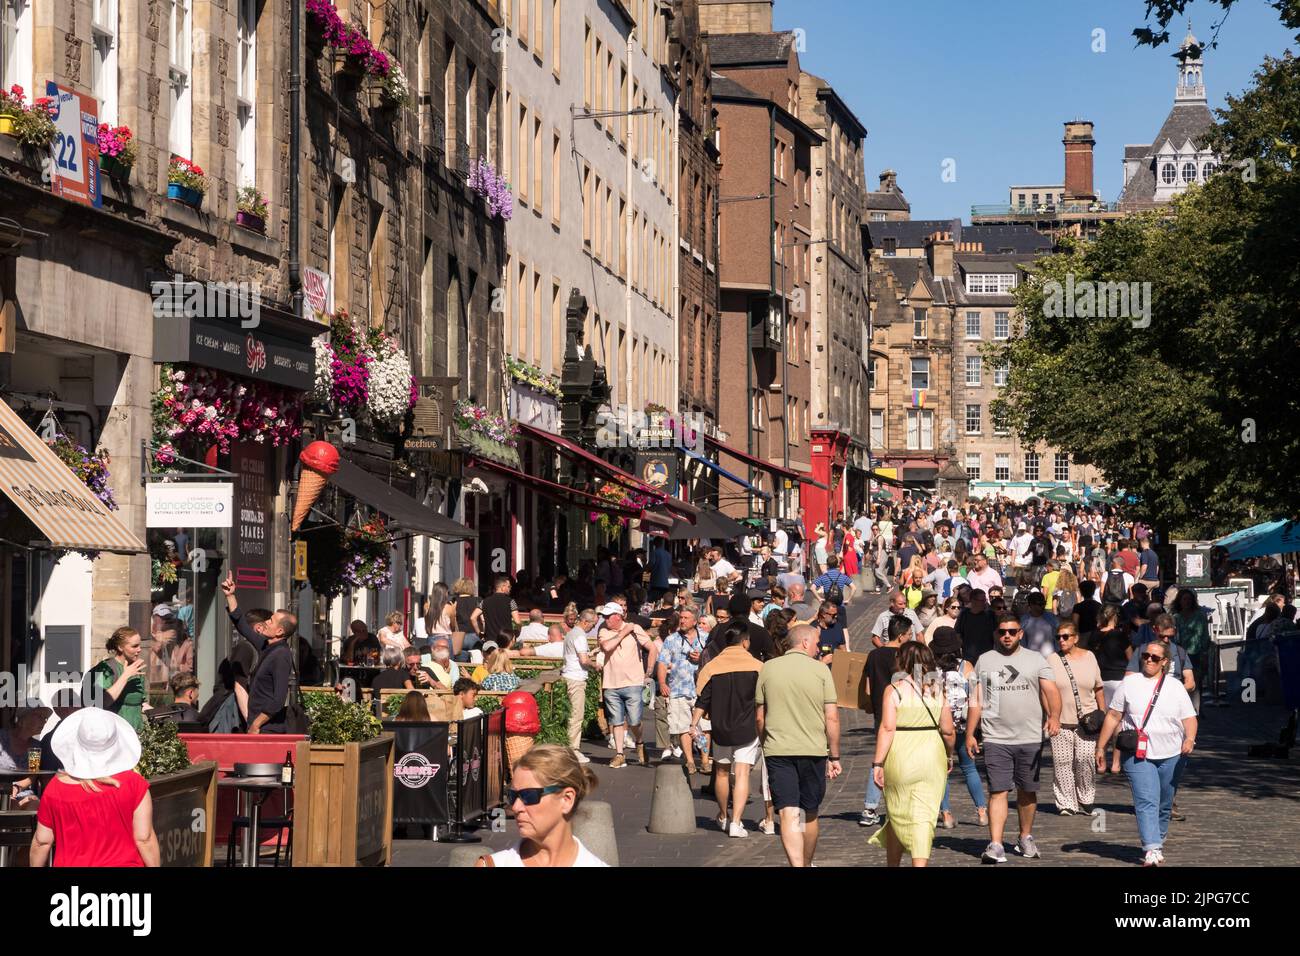 A view of the Grassmarket area of Edinburgh during the summer on a sunny day Stock Photo